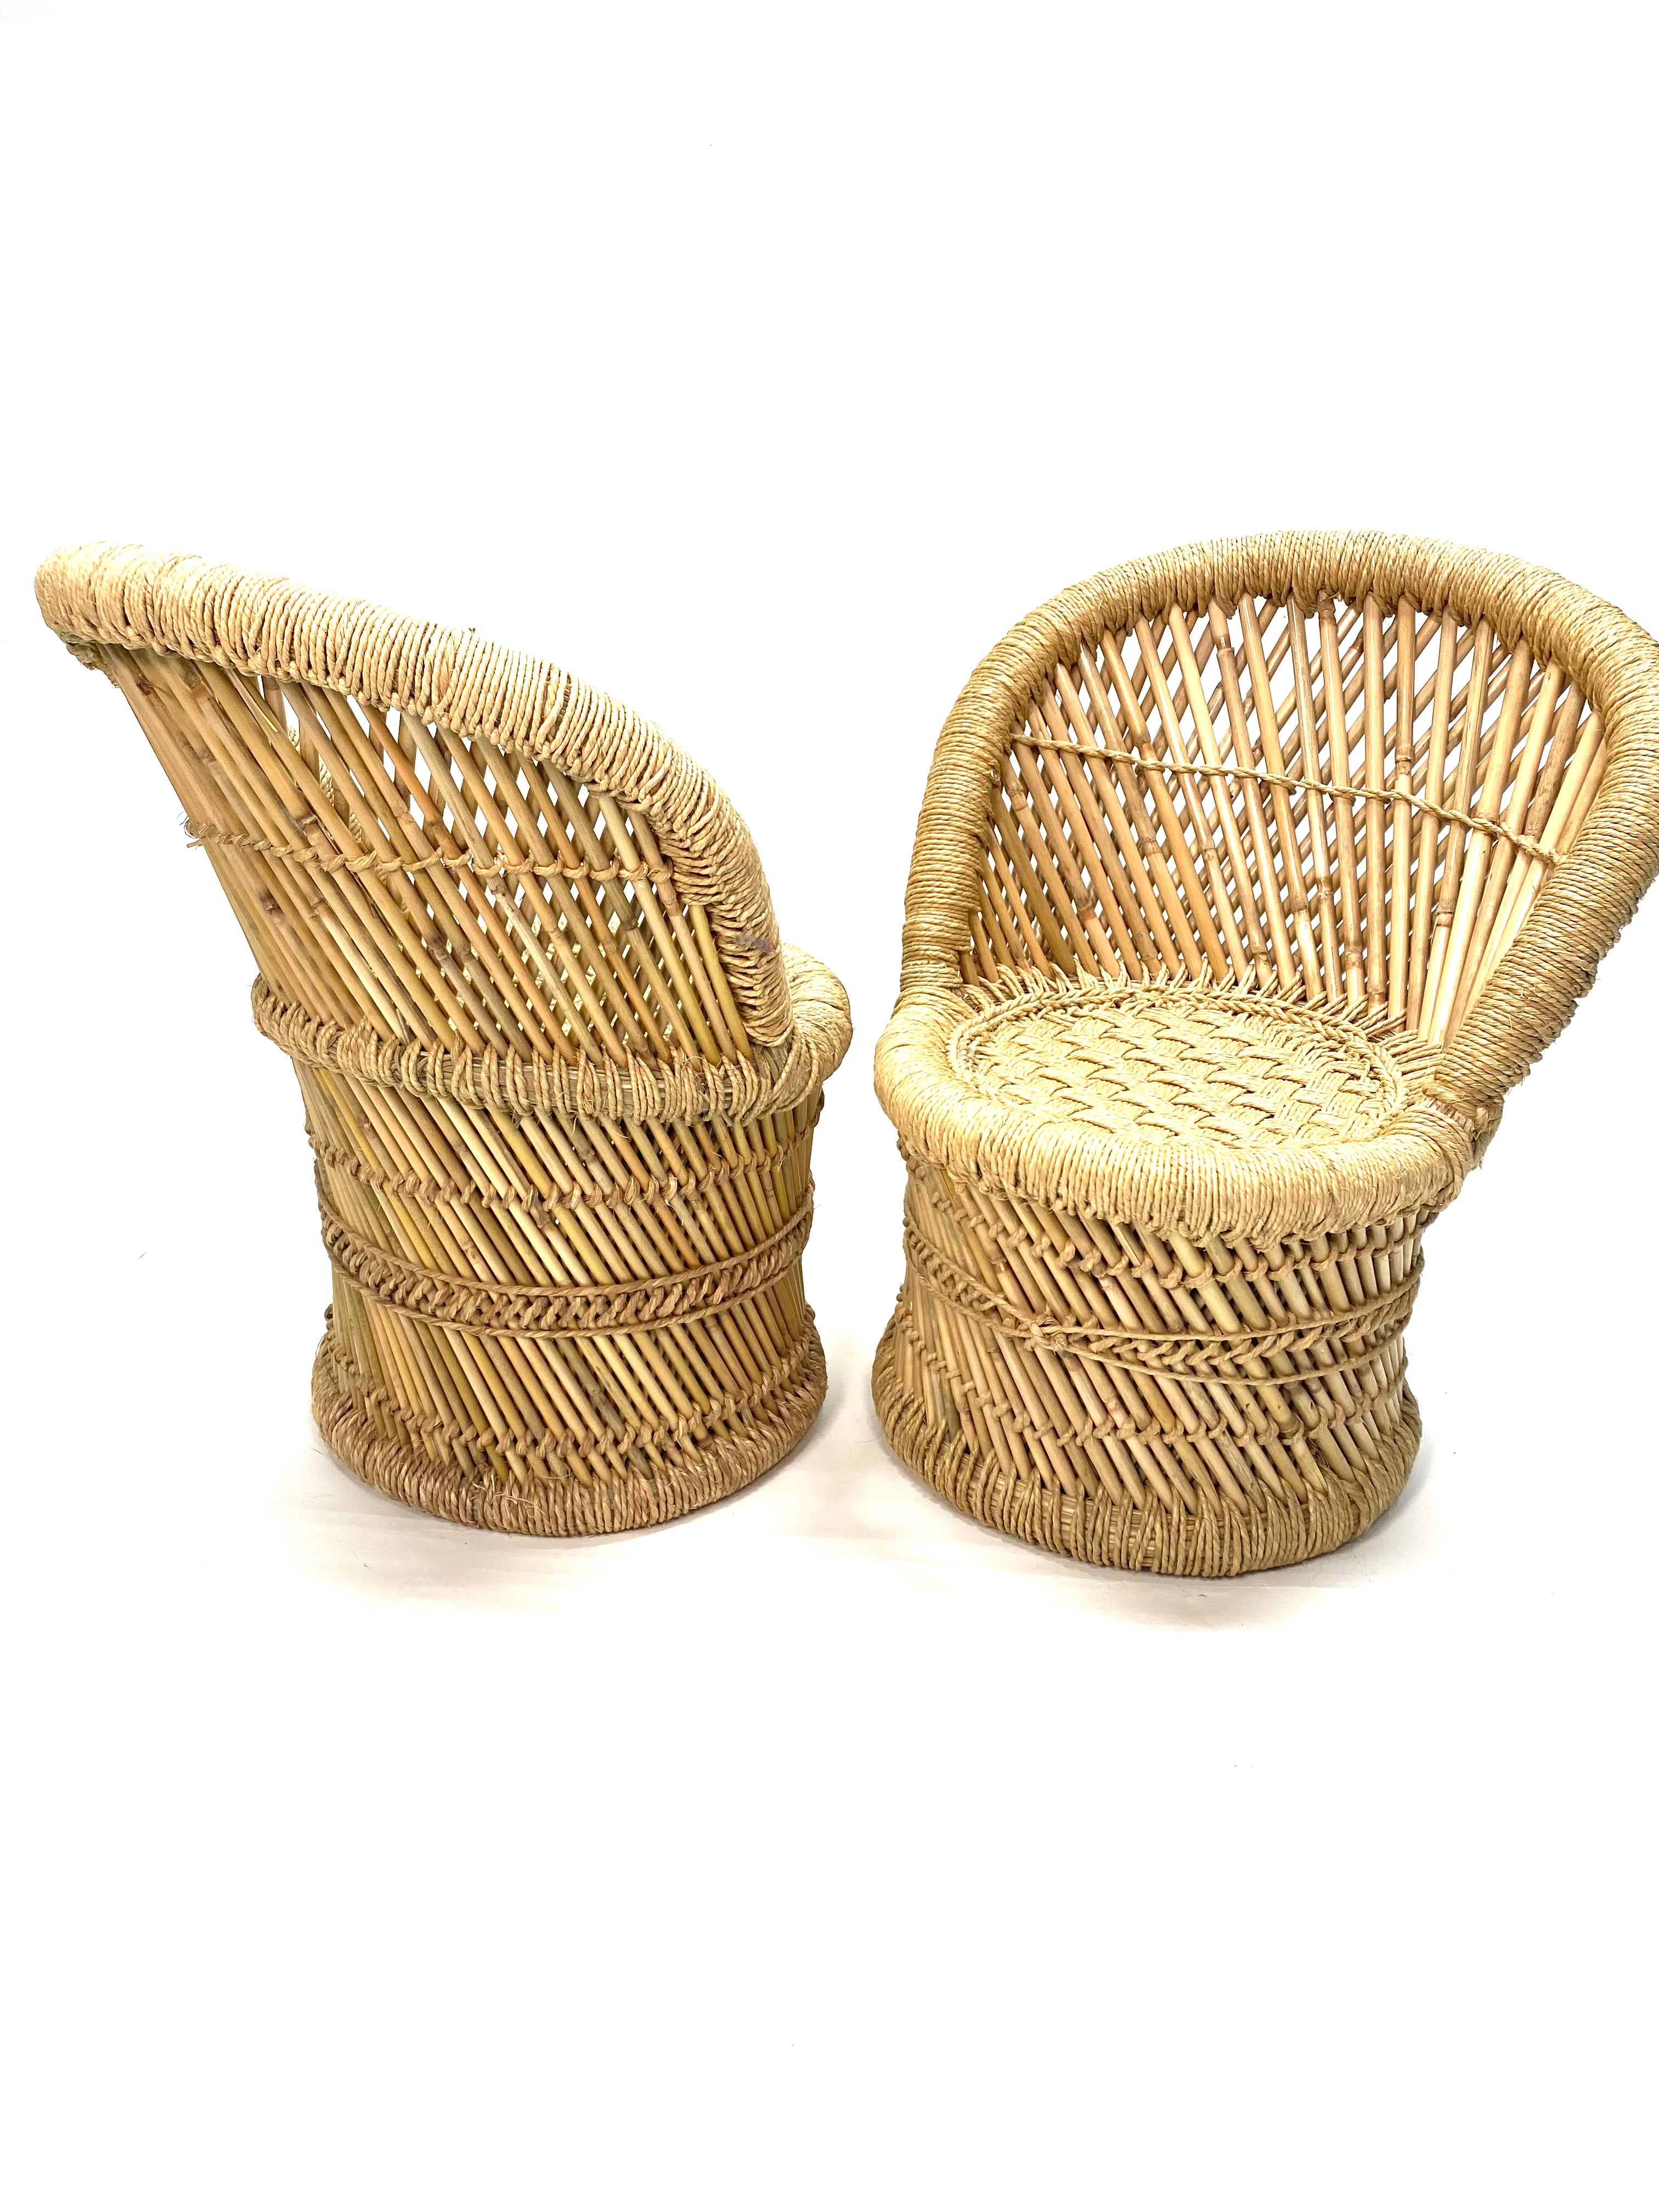 Pair of Children’s Cane Chairs